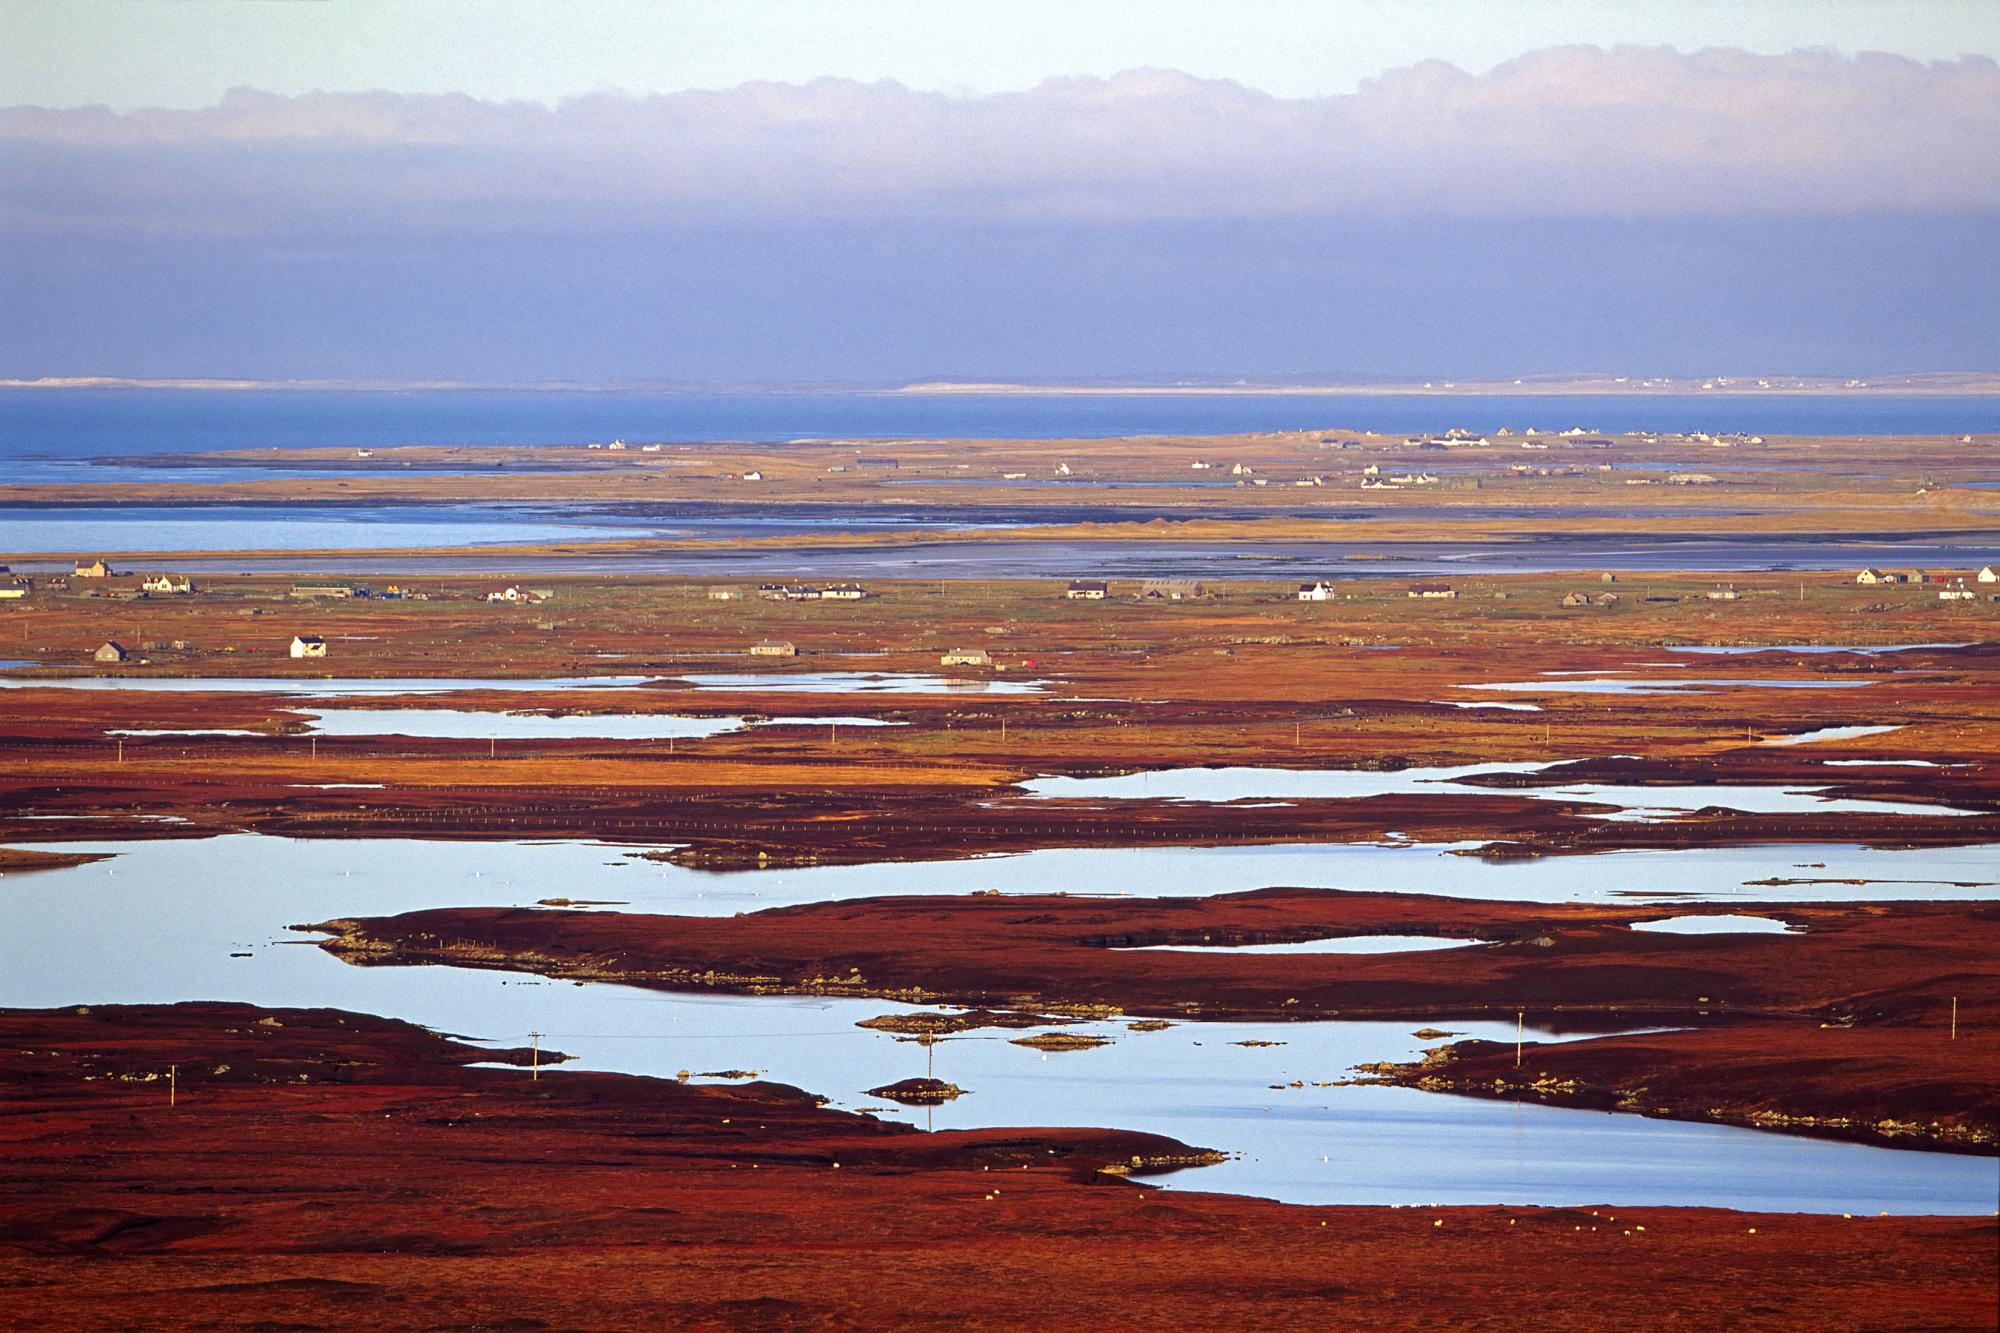 View north west across the peatland lochs and machair of South Uist and Benbecula ©Lorne Gill/SNH. For information on reproduction rights contact the Scottish Natural Heritage Image Library on Tel. 01738 444177 or www.nature.scot